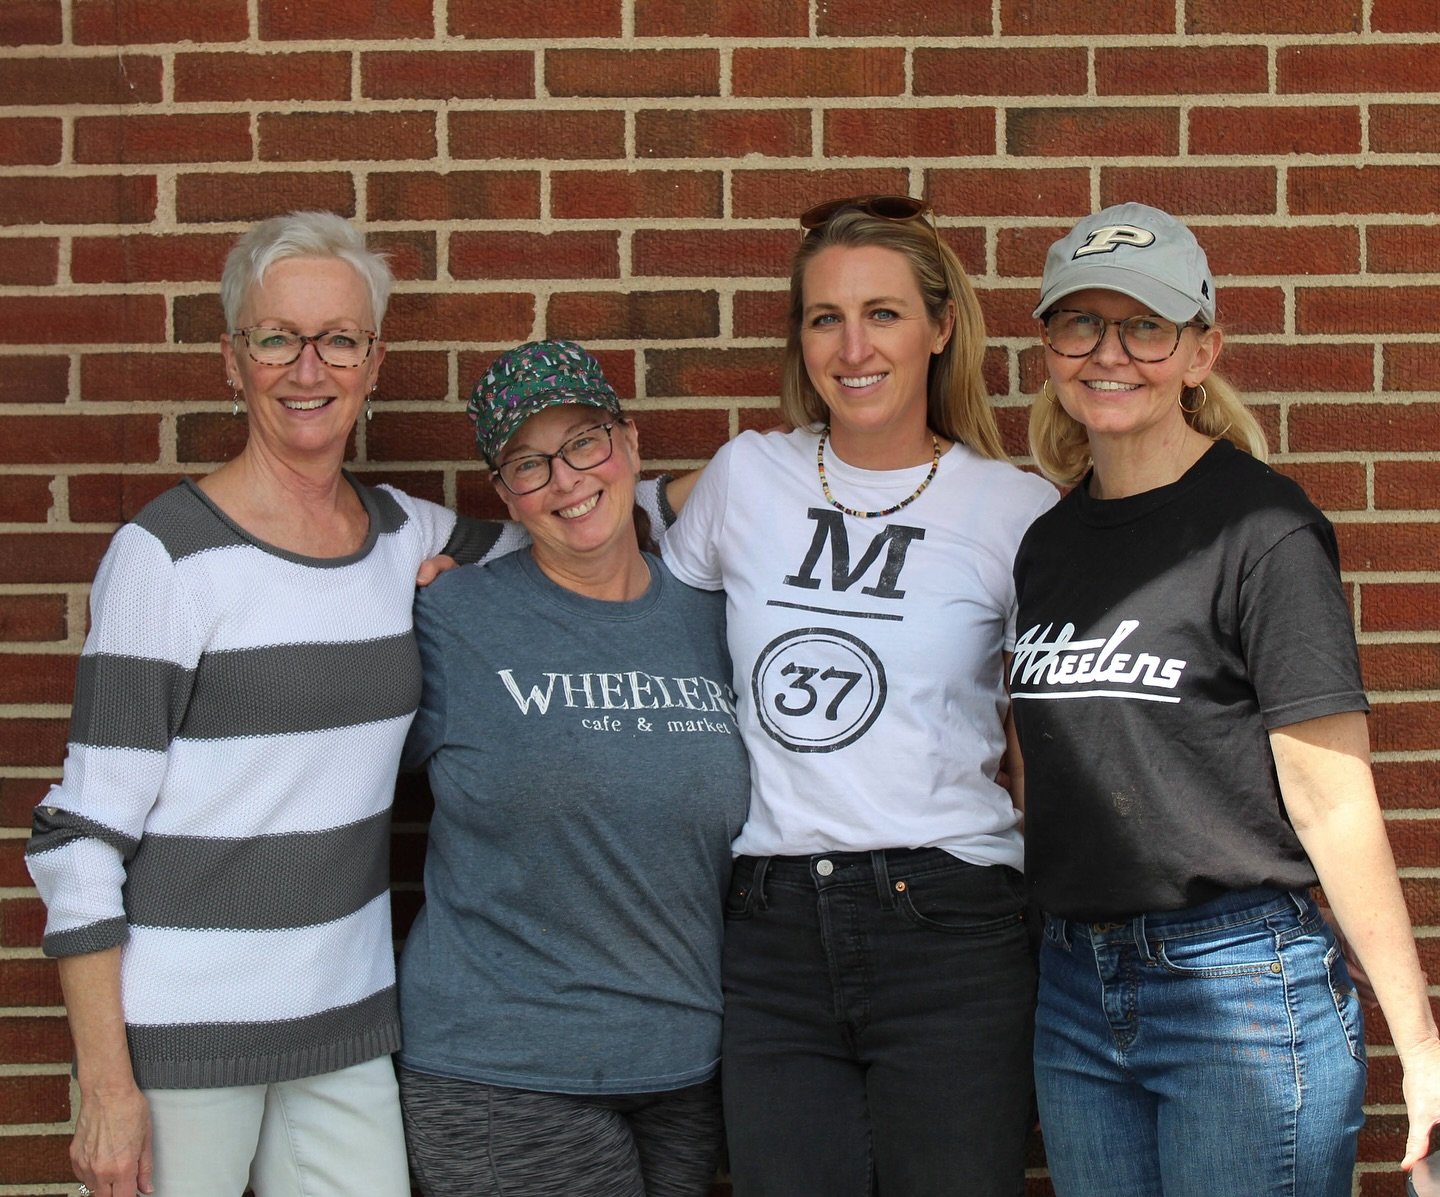 Happy Mother&rsquo;s Day Weekend 💛

We love and appreciate our Mercantile and Wheelers moms! We hope you have an amazing weekend celebrating the influential women in your life! 

#mothersday #motherhood #moms #smallbusiness #shoplocal #mercantile37 